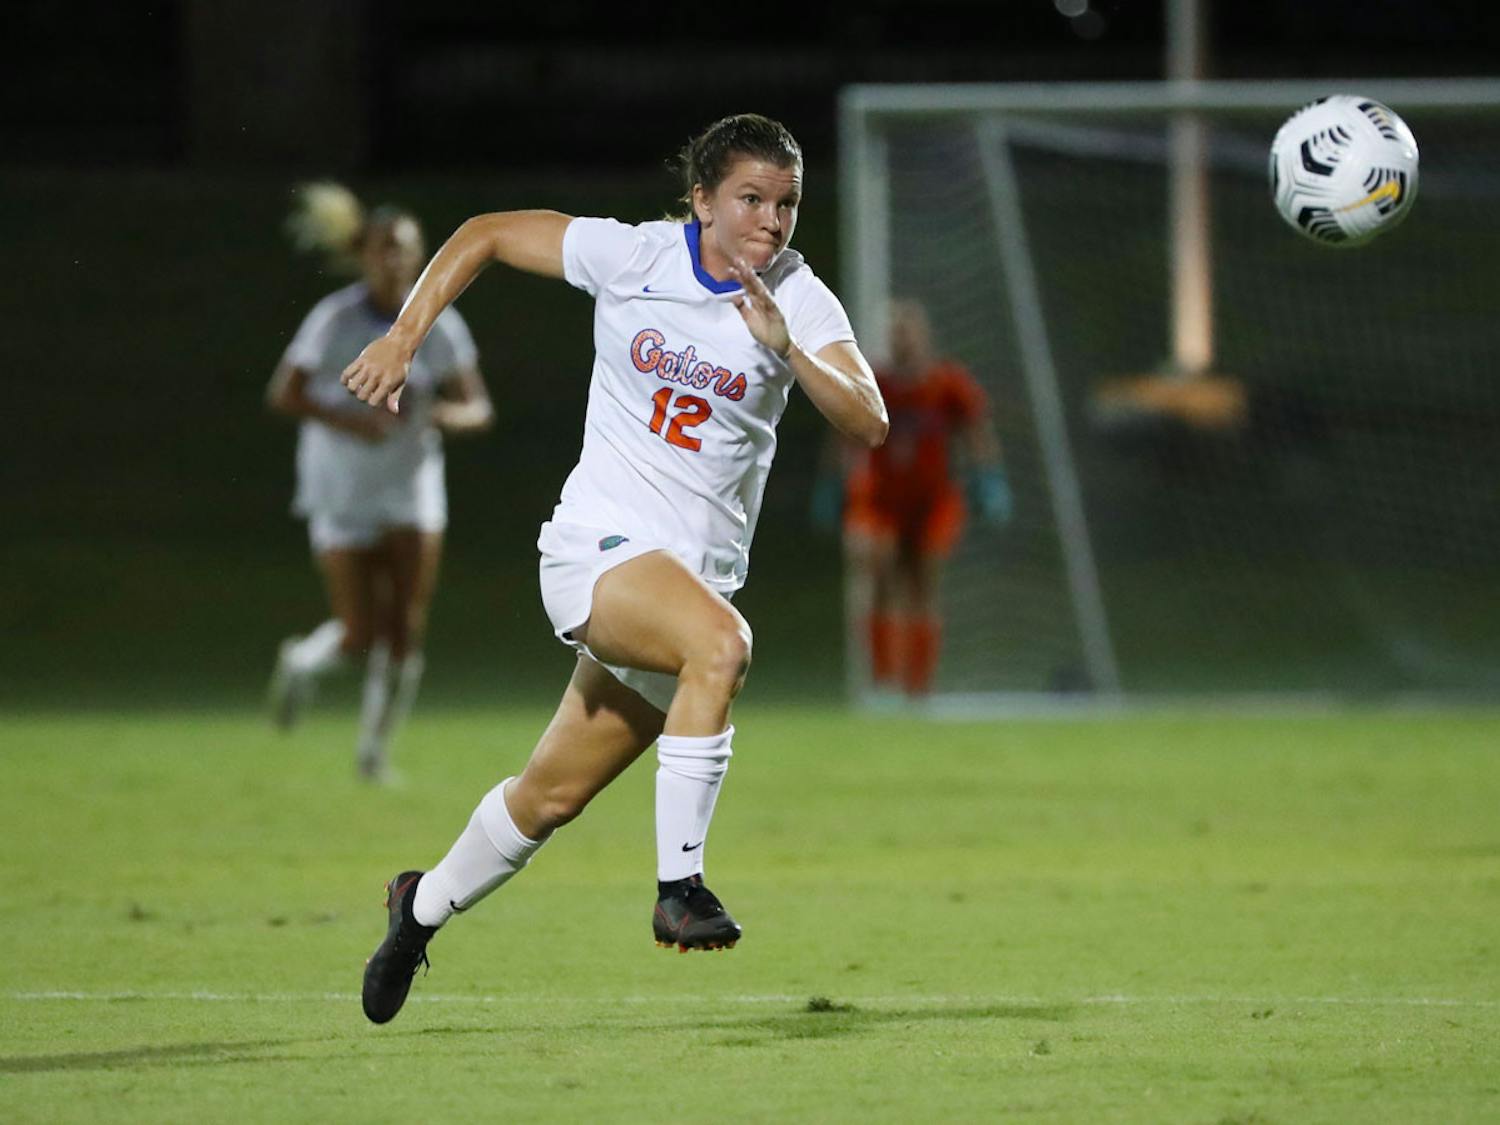 Florida sophomore Maddy Rhodes photographed during a game against Kentucky on Sept. 23.